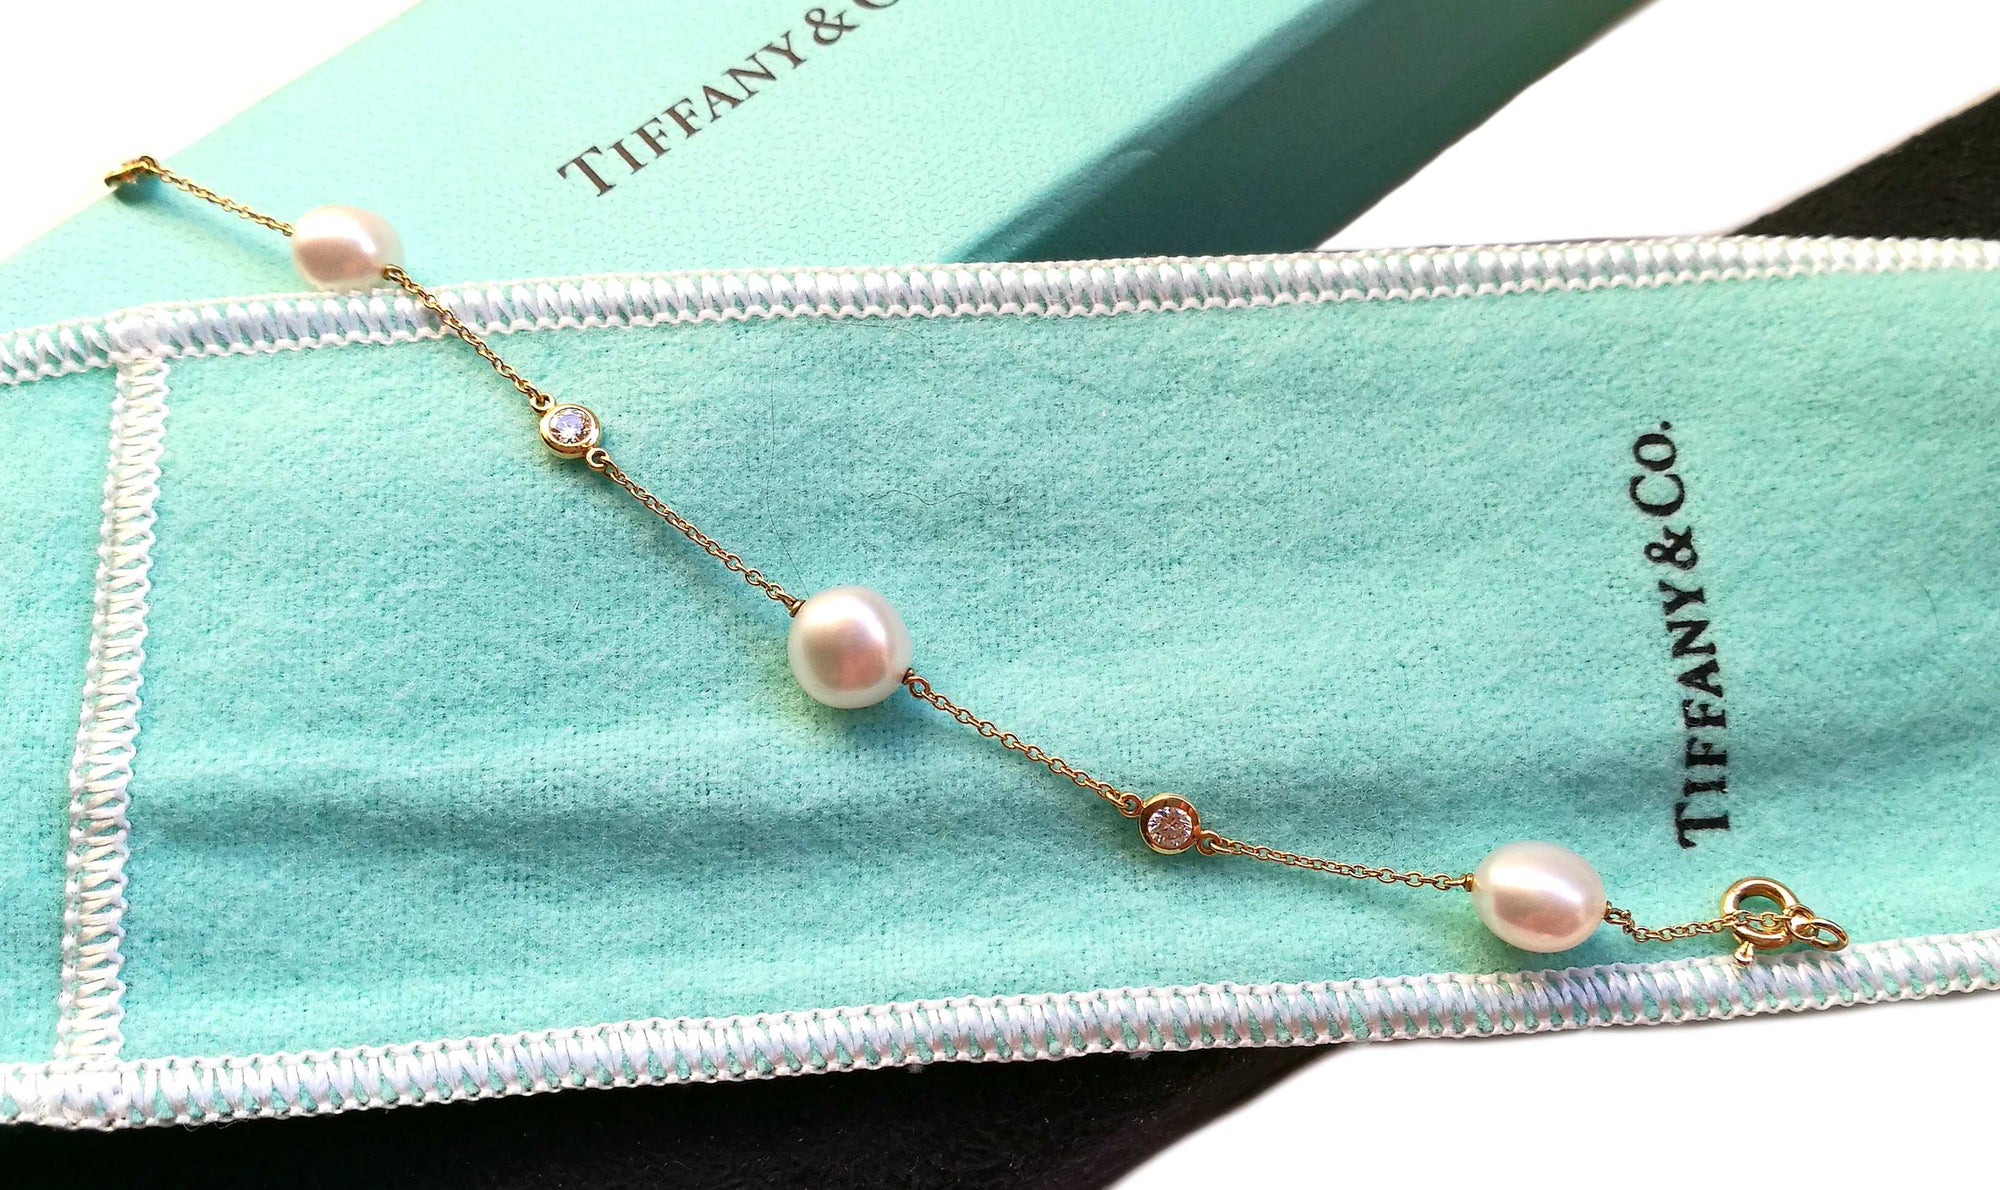 Tiffany & Co. Elsa Peretti 'Diamonds by the Yard' Bracelet in 18k Gold with Pearls